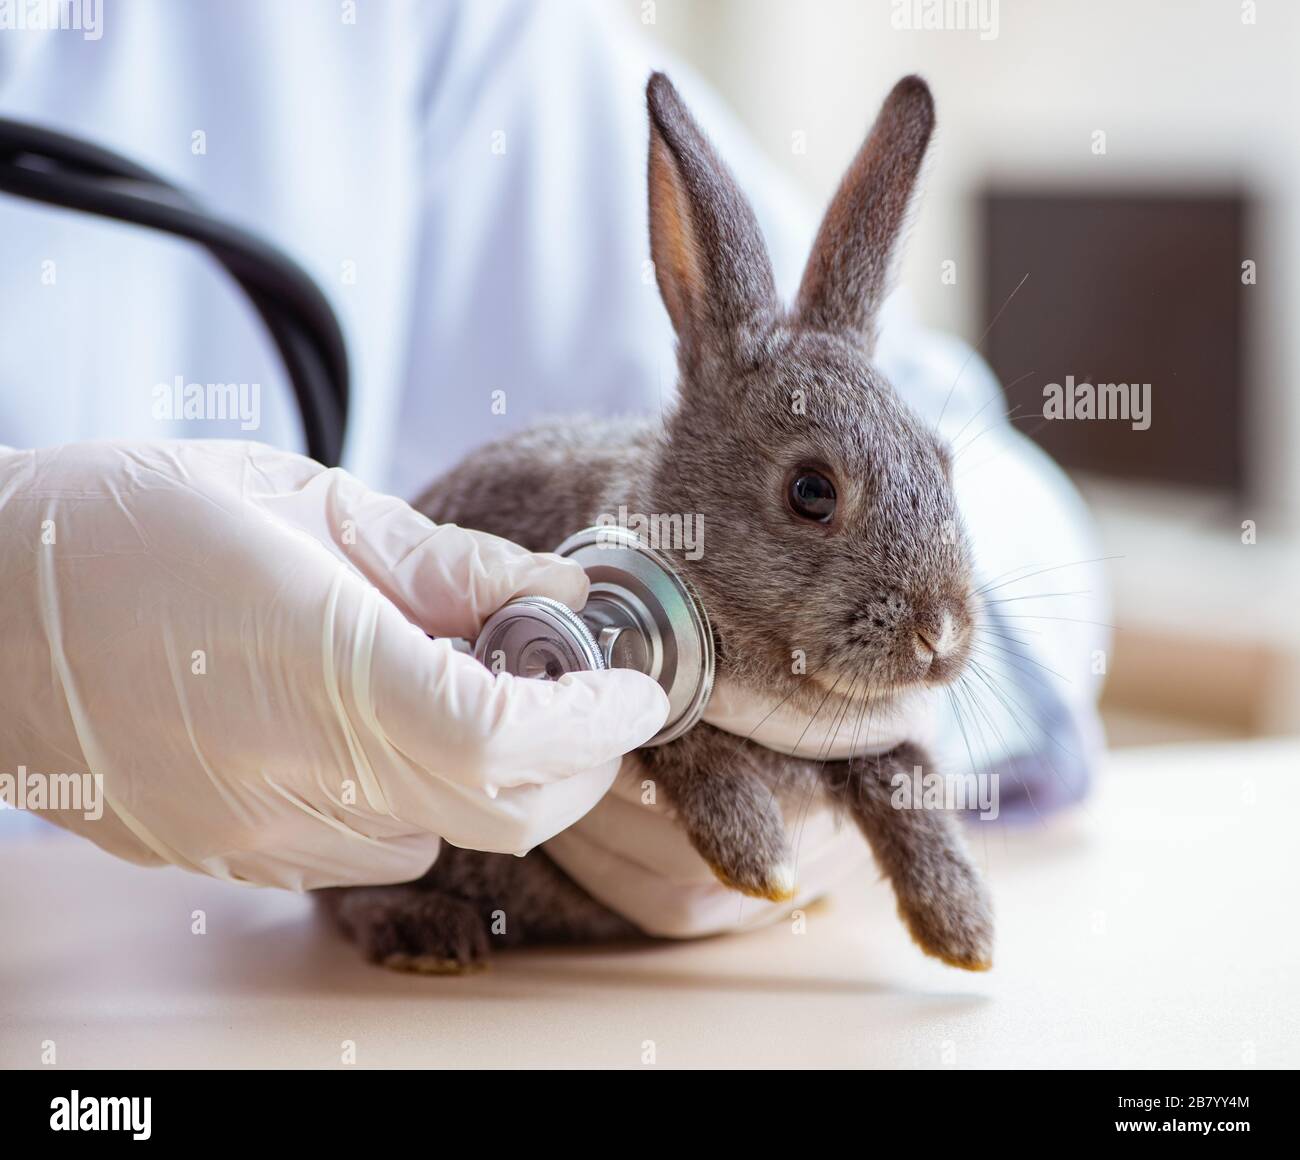 A question The Rabbit Doctors are - The Rabbit Doctors